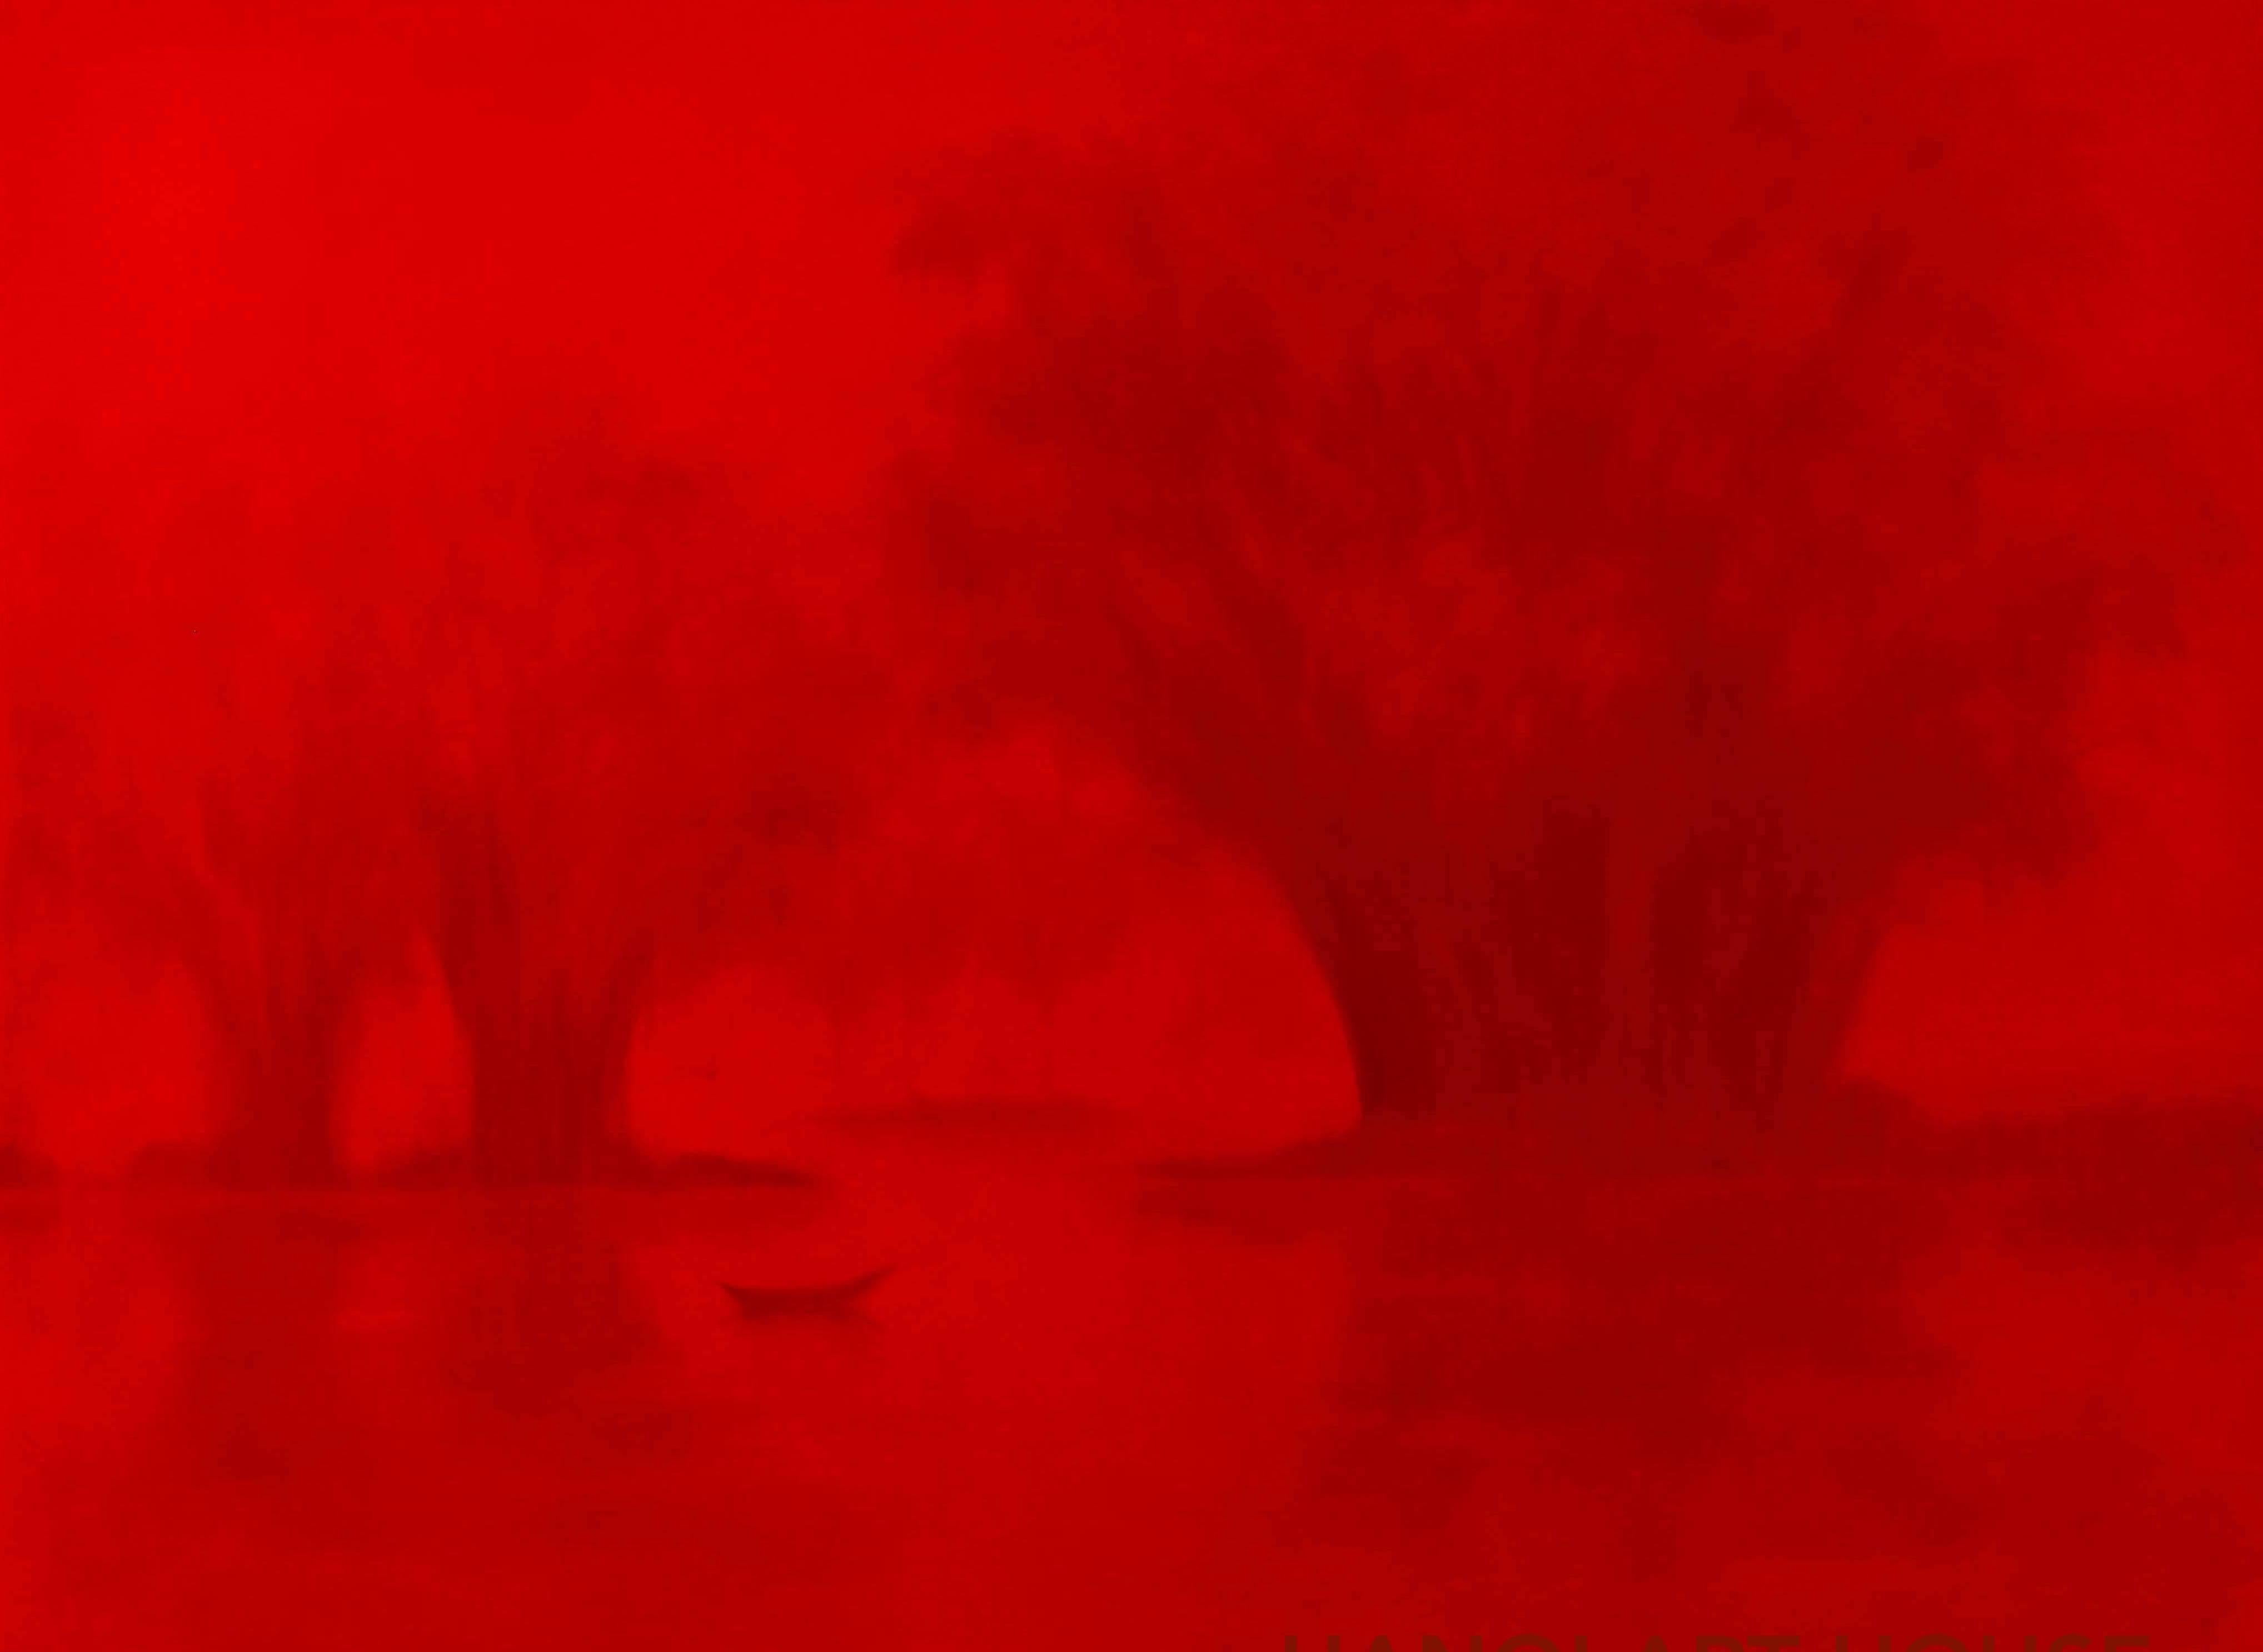 Hoang Duc Dzung Interior Painting - Quiet Moments 21st century Asian landscape oil painting misty red 